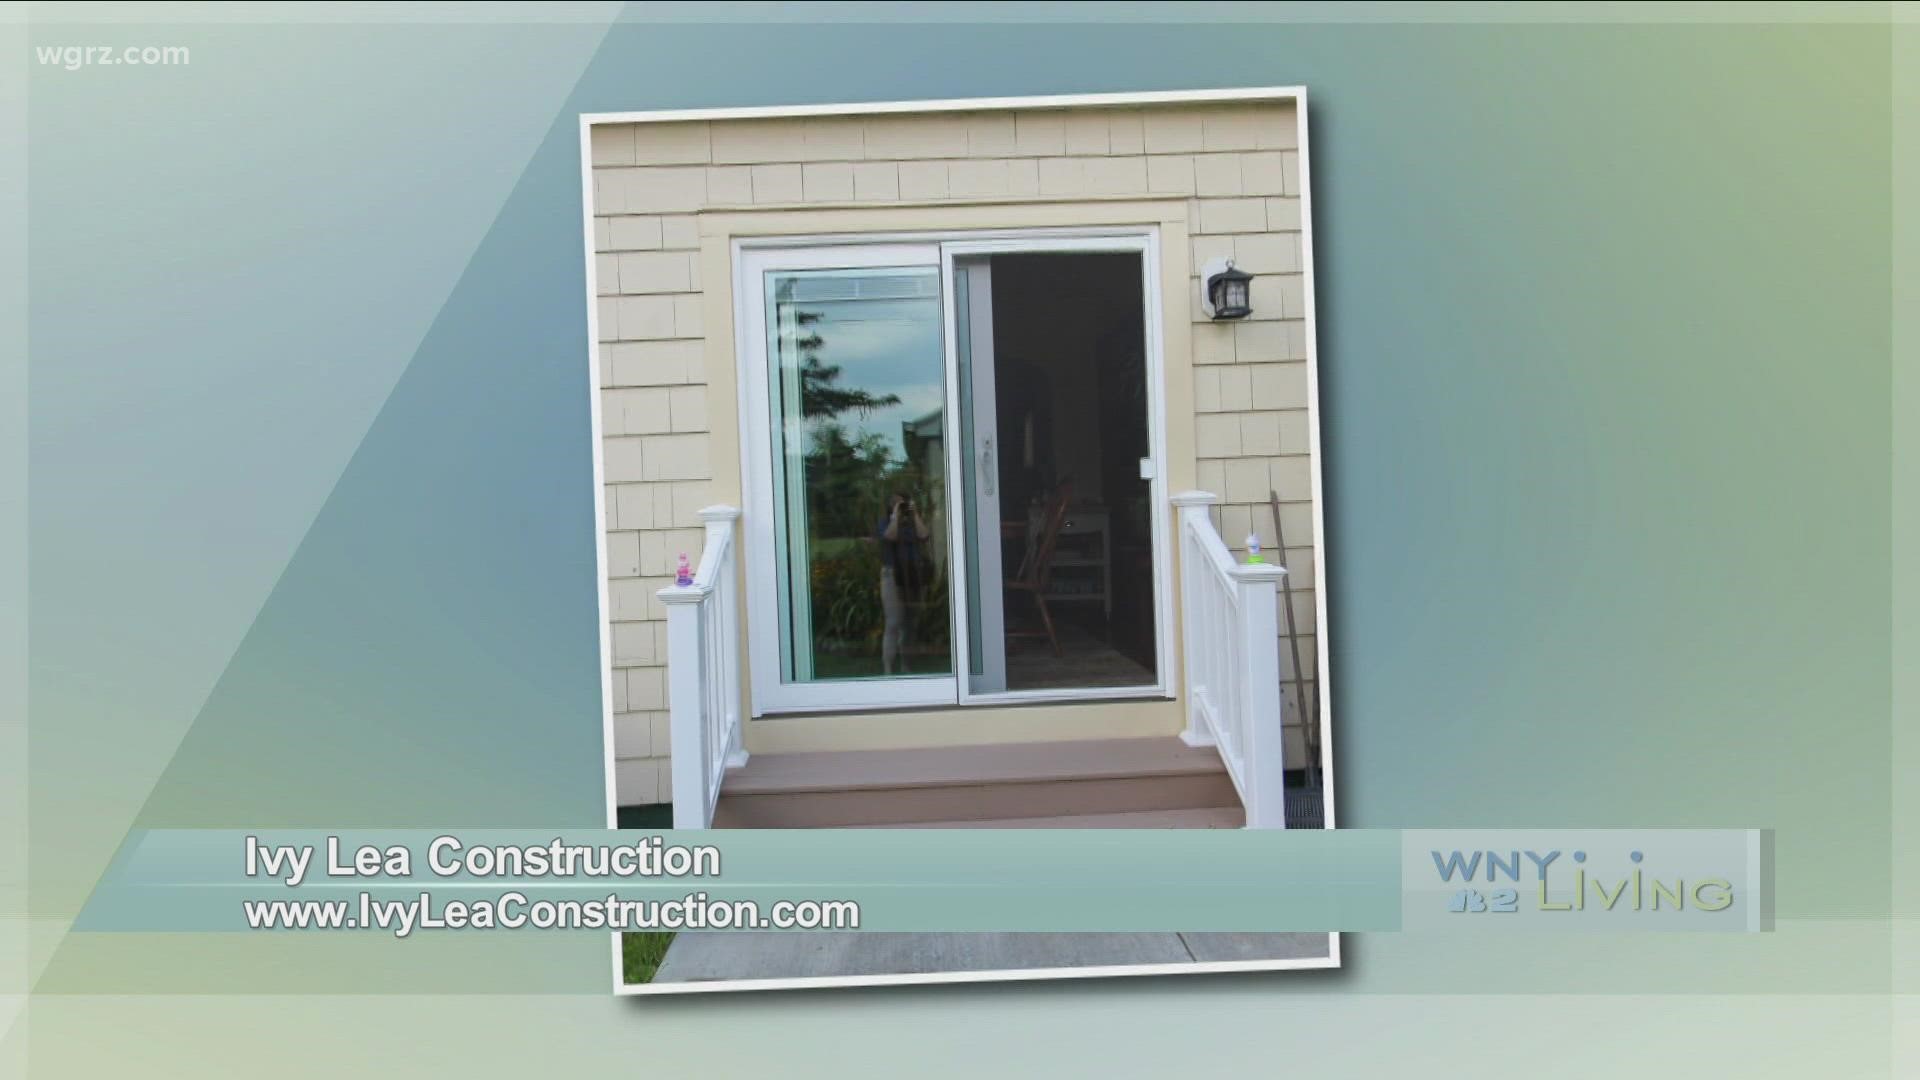 WNY Living - August 21 - Ivy Lea Construction (THIS VIDEO IS SPONSORED BY IVY LEA CONSTRUCTION)